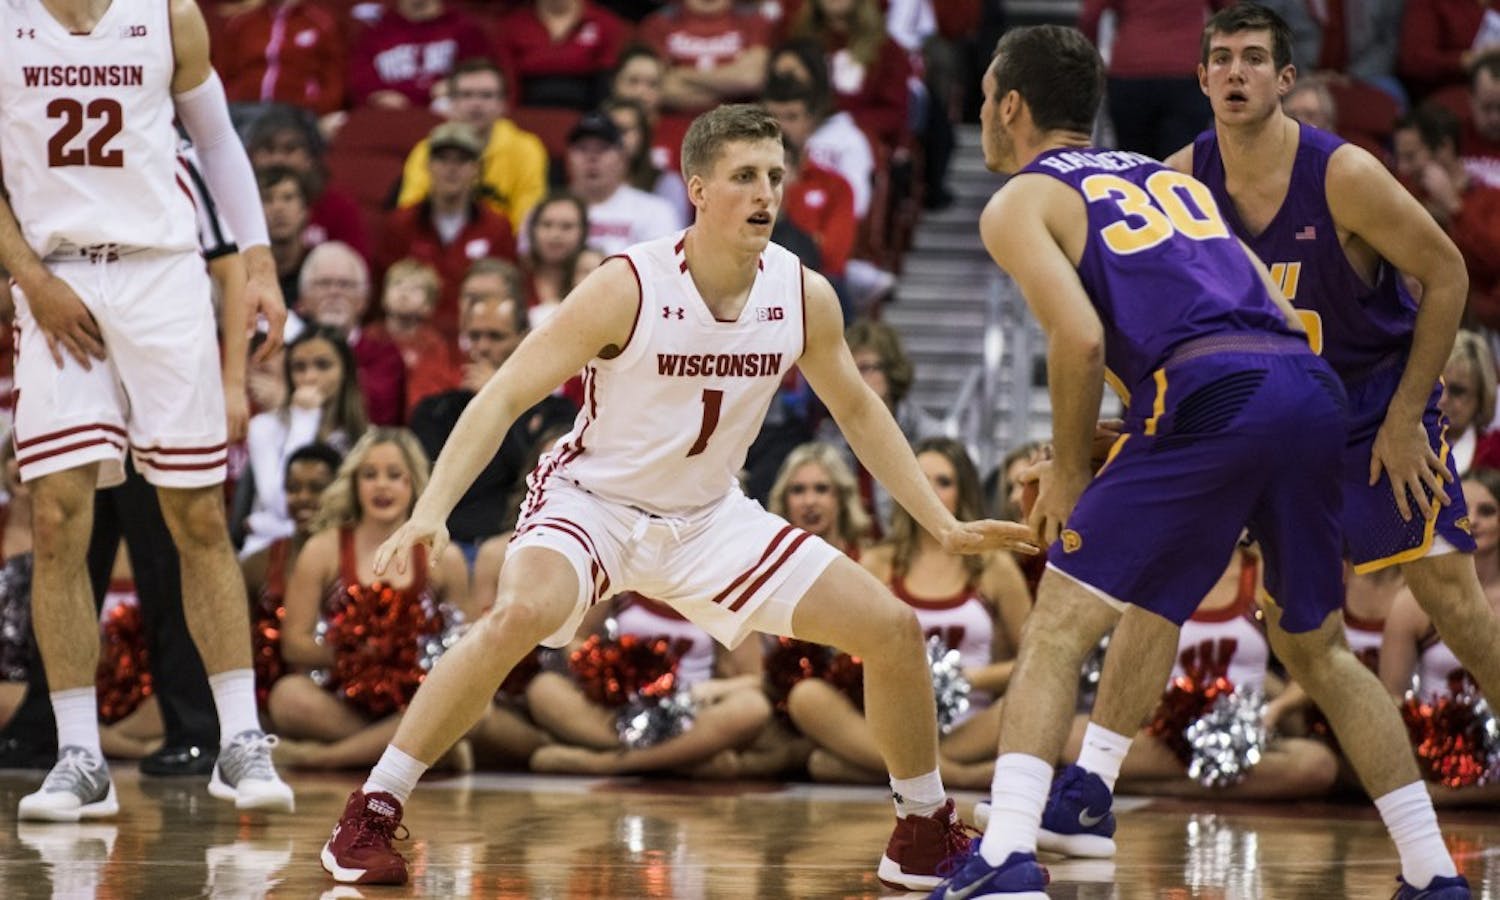 Junior guard Brevin Pritzl led the Badgers with 17 points and hit multiple huge three-pointers in the second half.